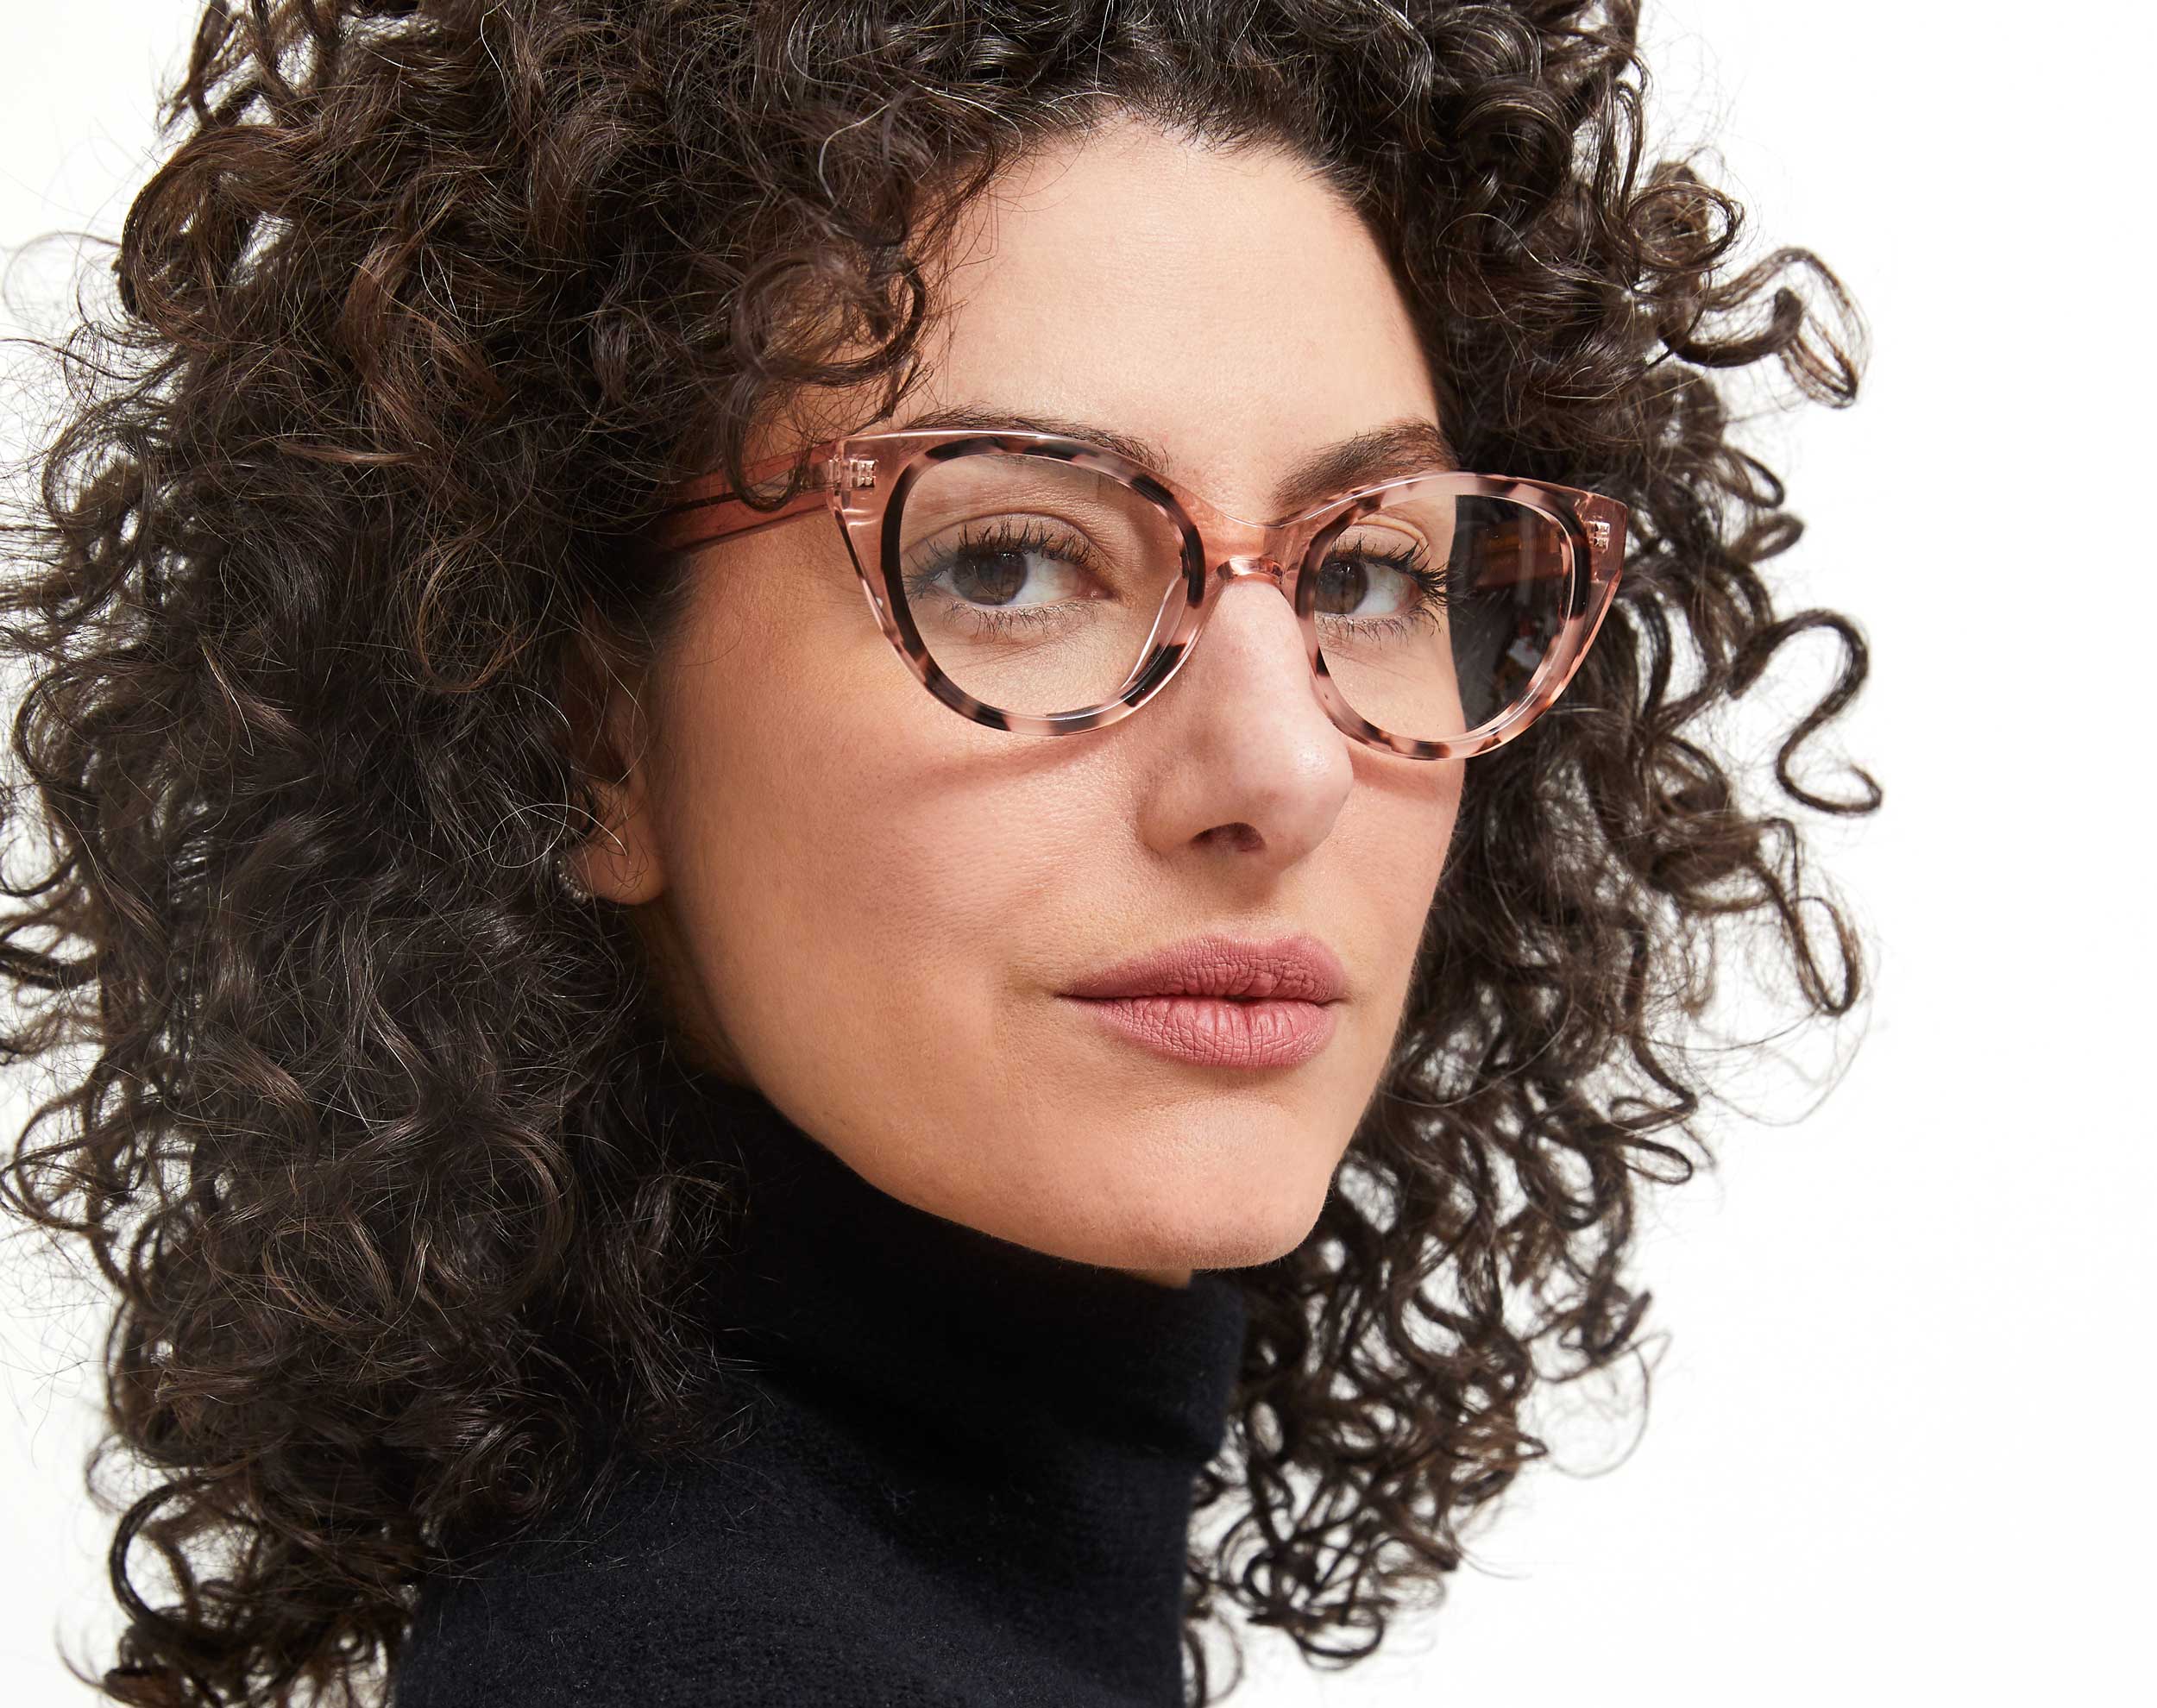 Photo of a man or woman wearing Colette Black Marble Reading Glasses by French Kiwis